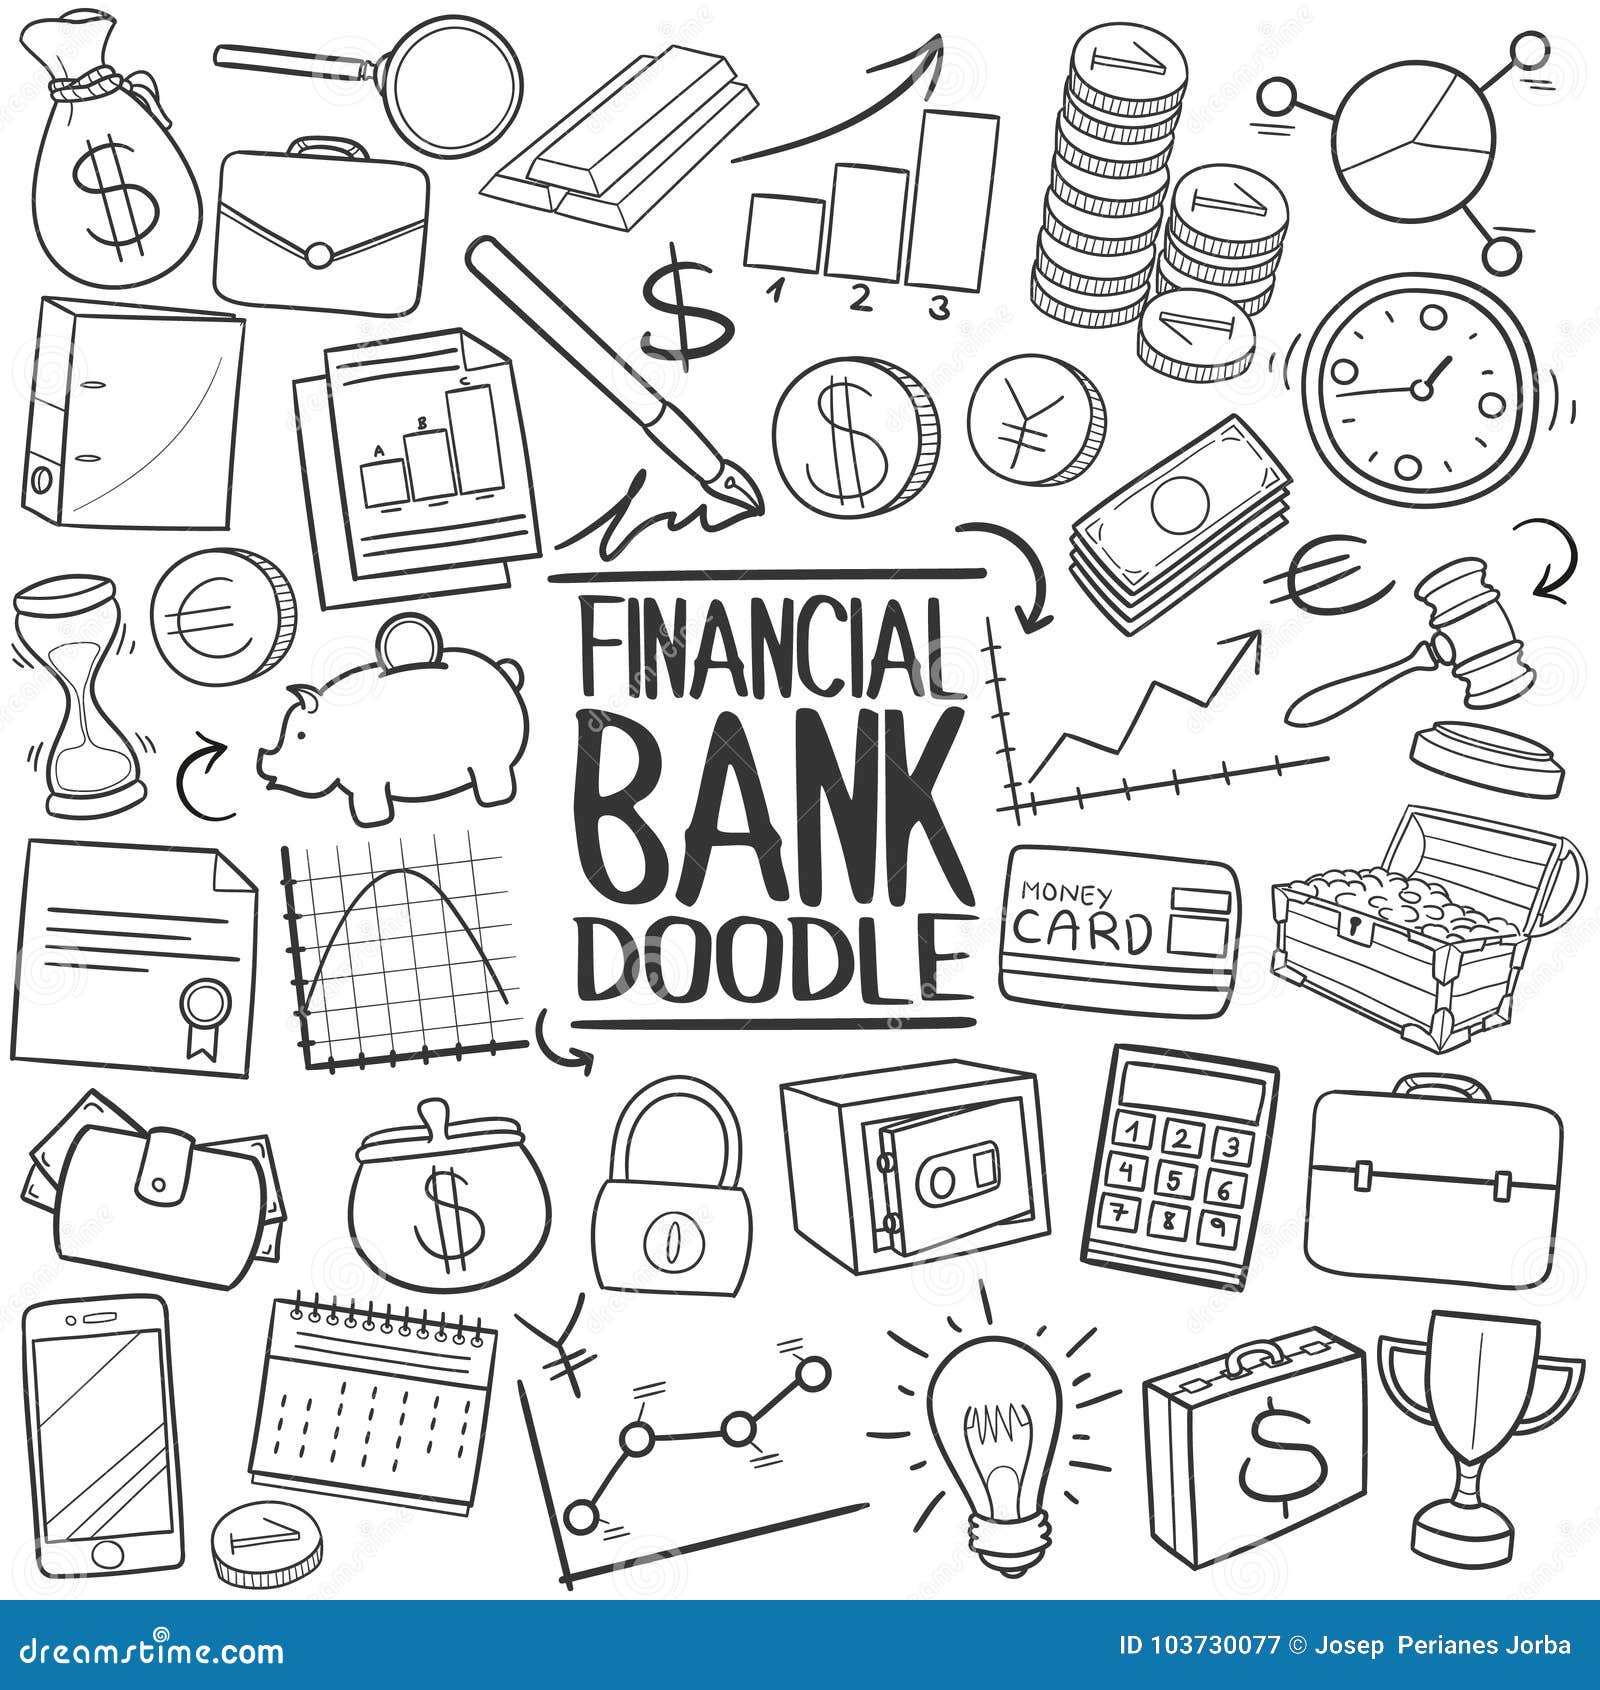 financial bank traditional doodle icon hand draw set